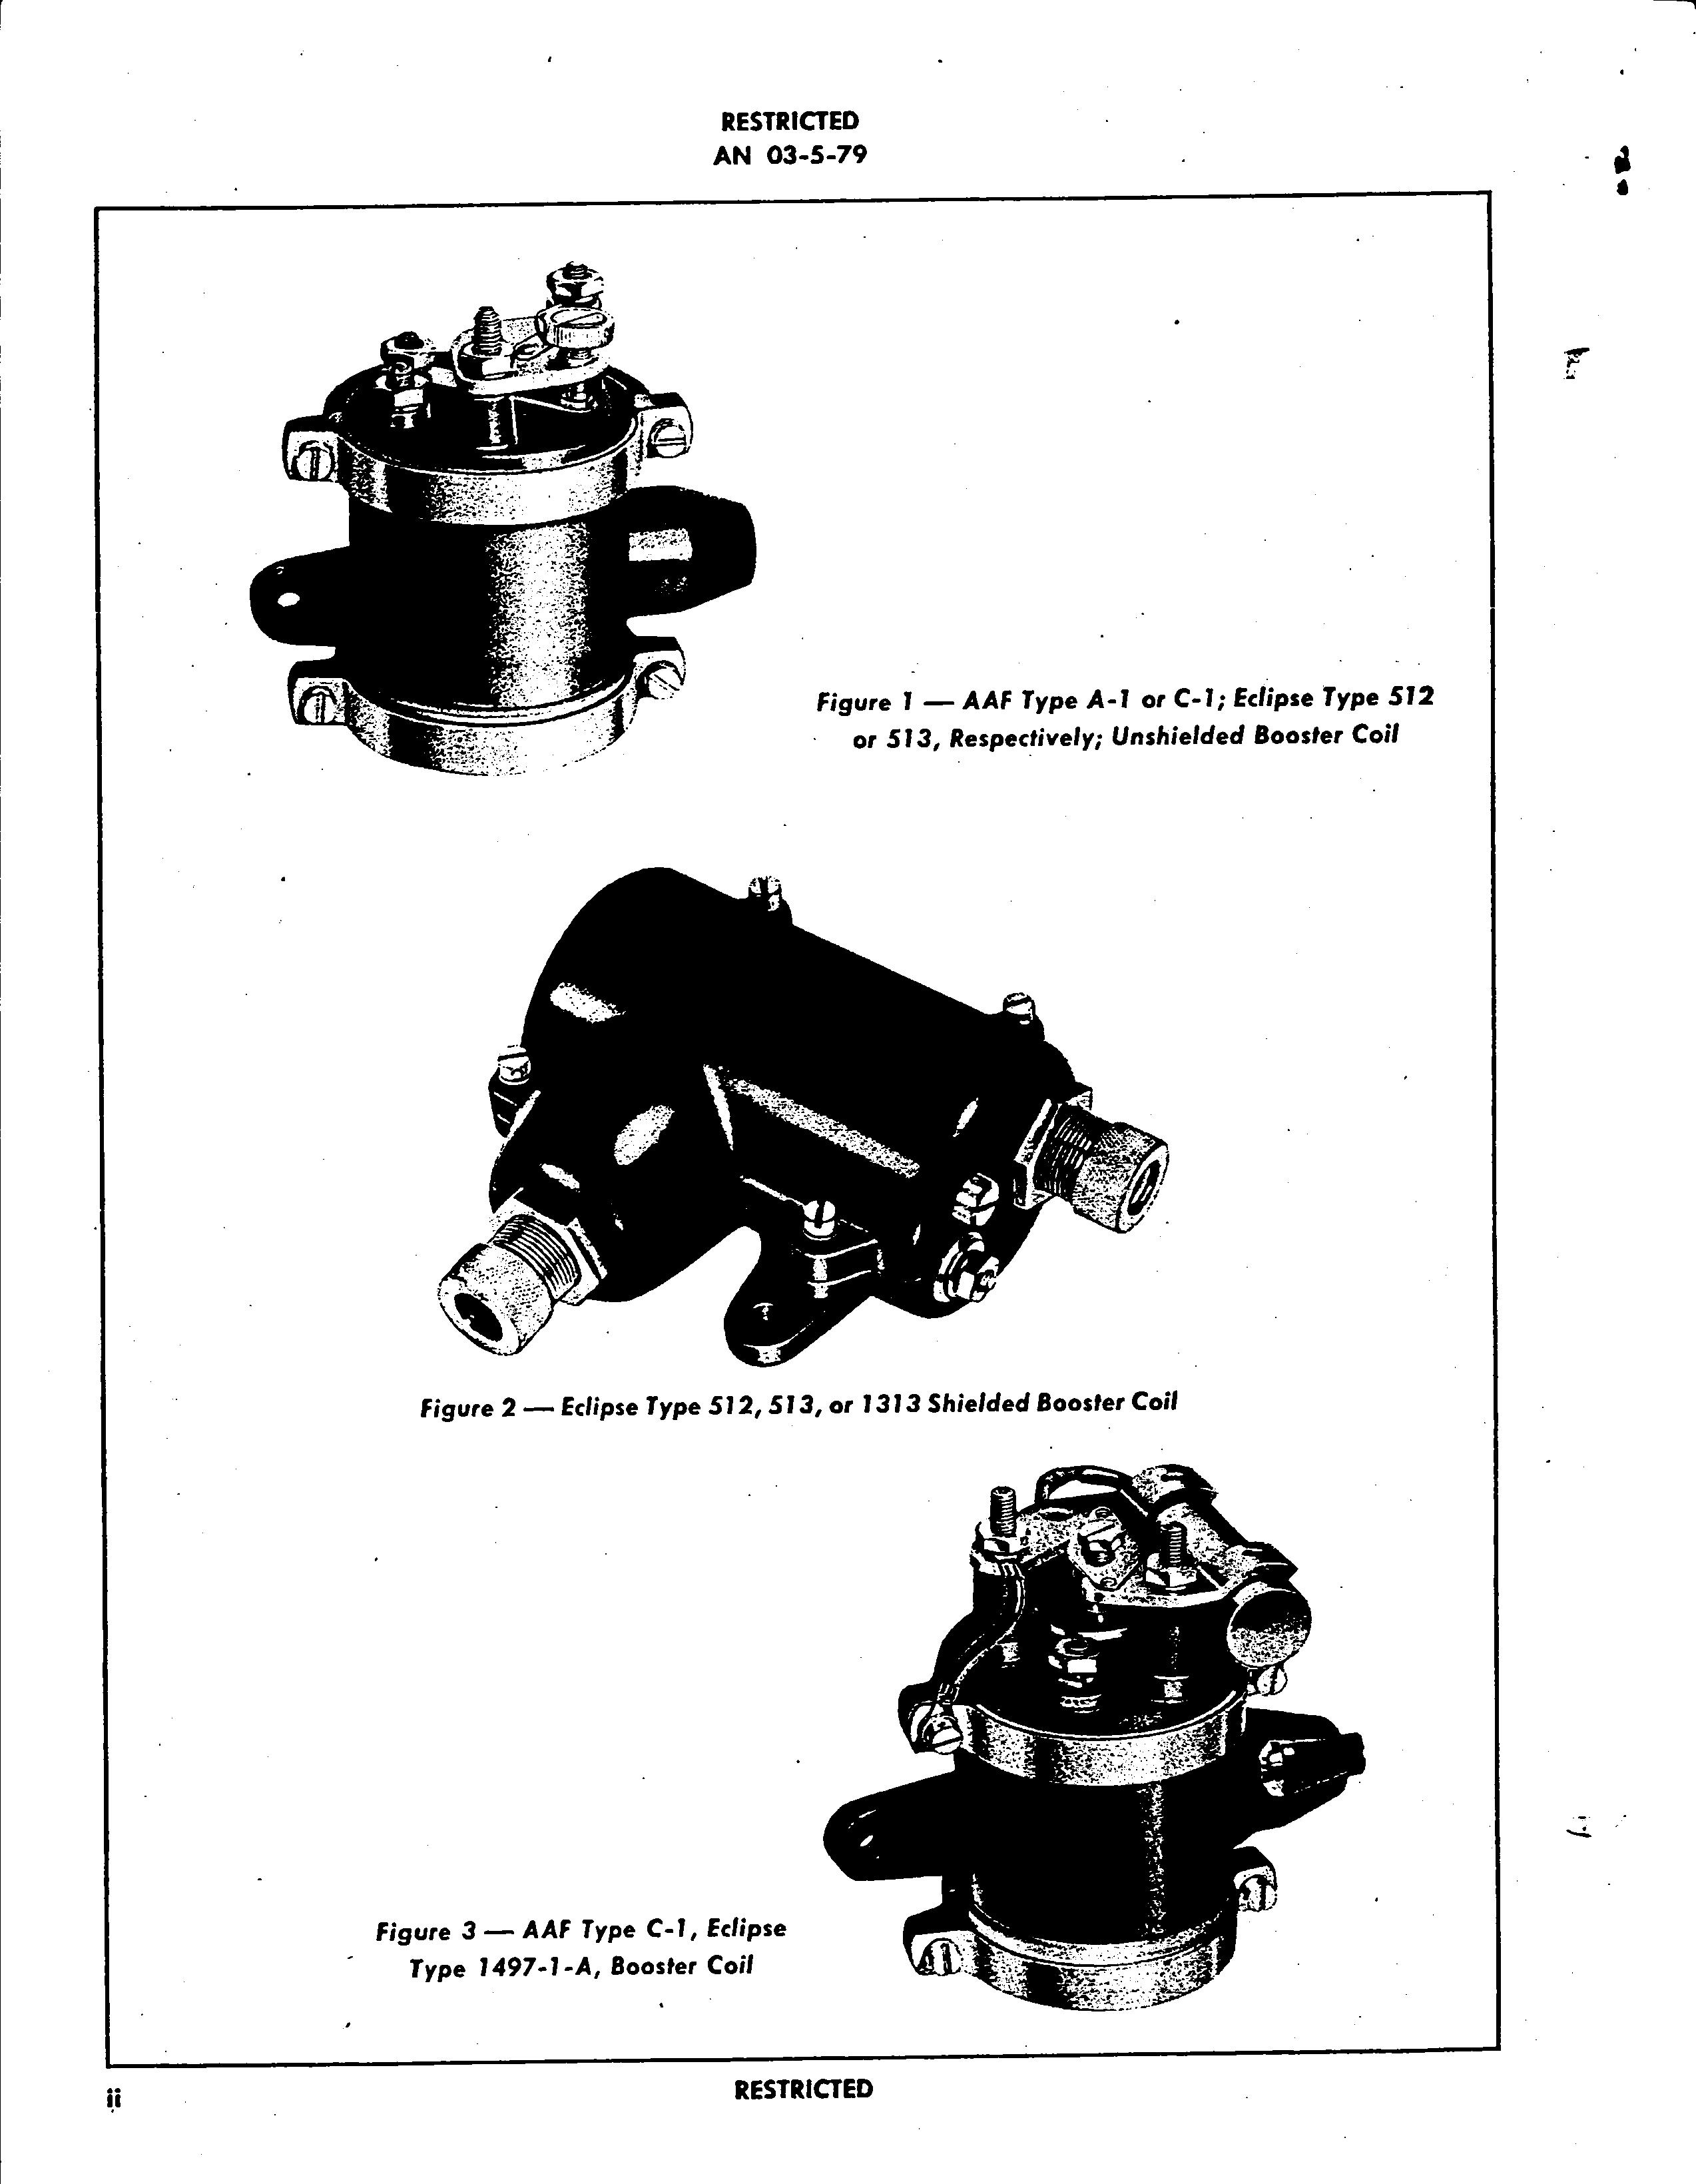 Sample page 4 from AirCorps Library document: Service and Instructions for High-Tension Booster Coils